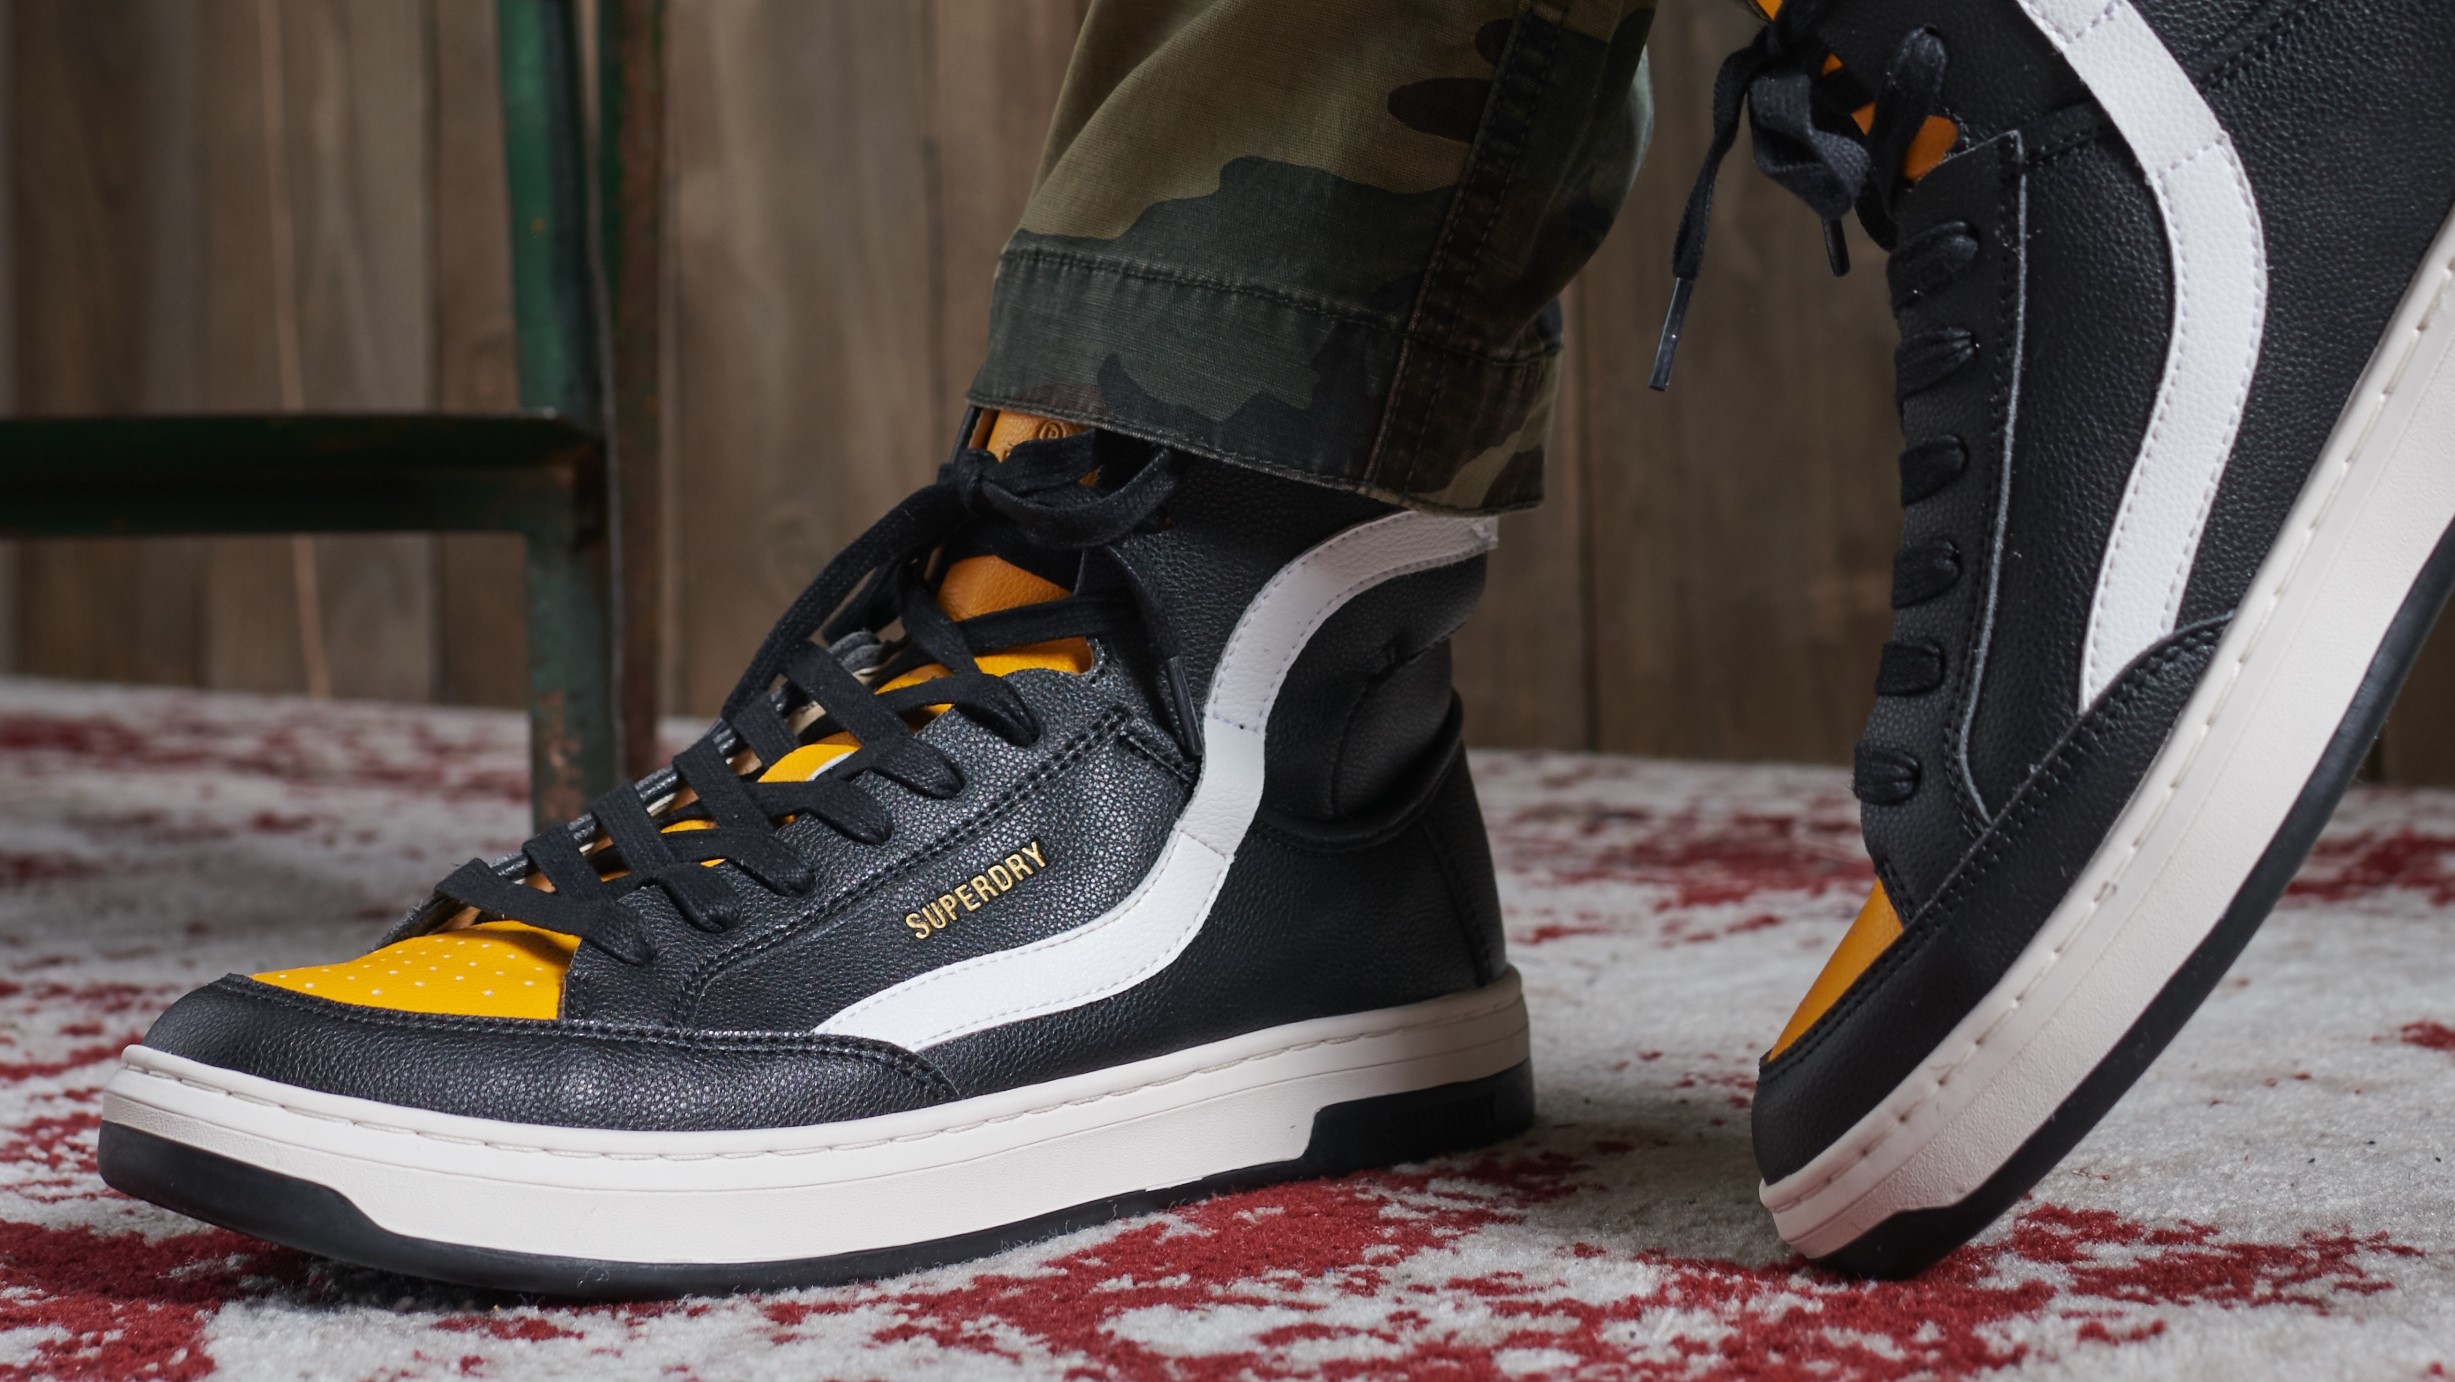 Superdry men's high tops in black yellow and white